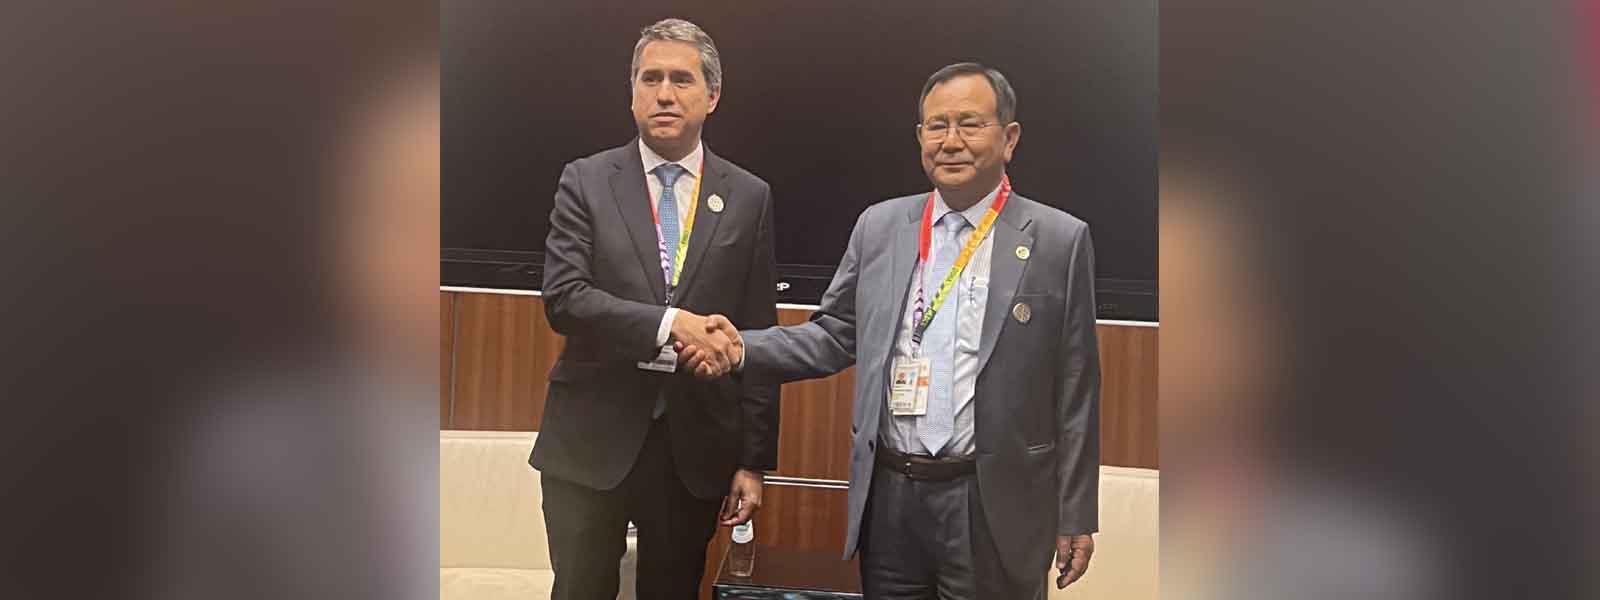 Minister of State for External Affairs, Dr. Rajkumar Ranjan Singh met H.E. Mr. Francisco André, Secretary of State for Foreign Affairs and Cooperation of Portugal on the sidelines of the 5th UN Conference on the Least Developed Countries in Doha